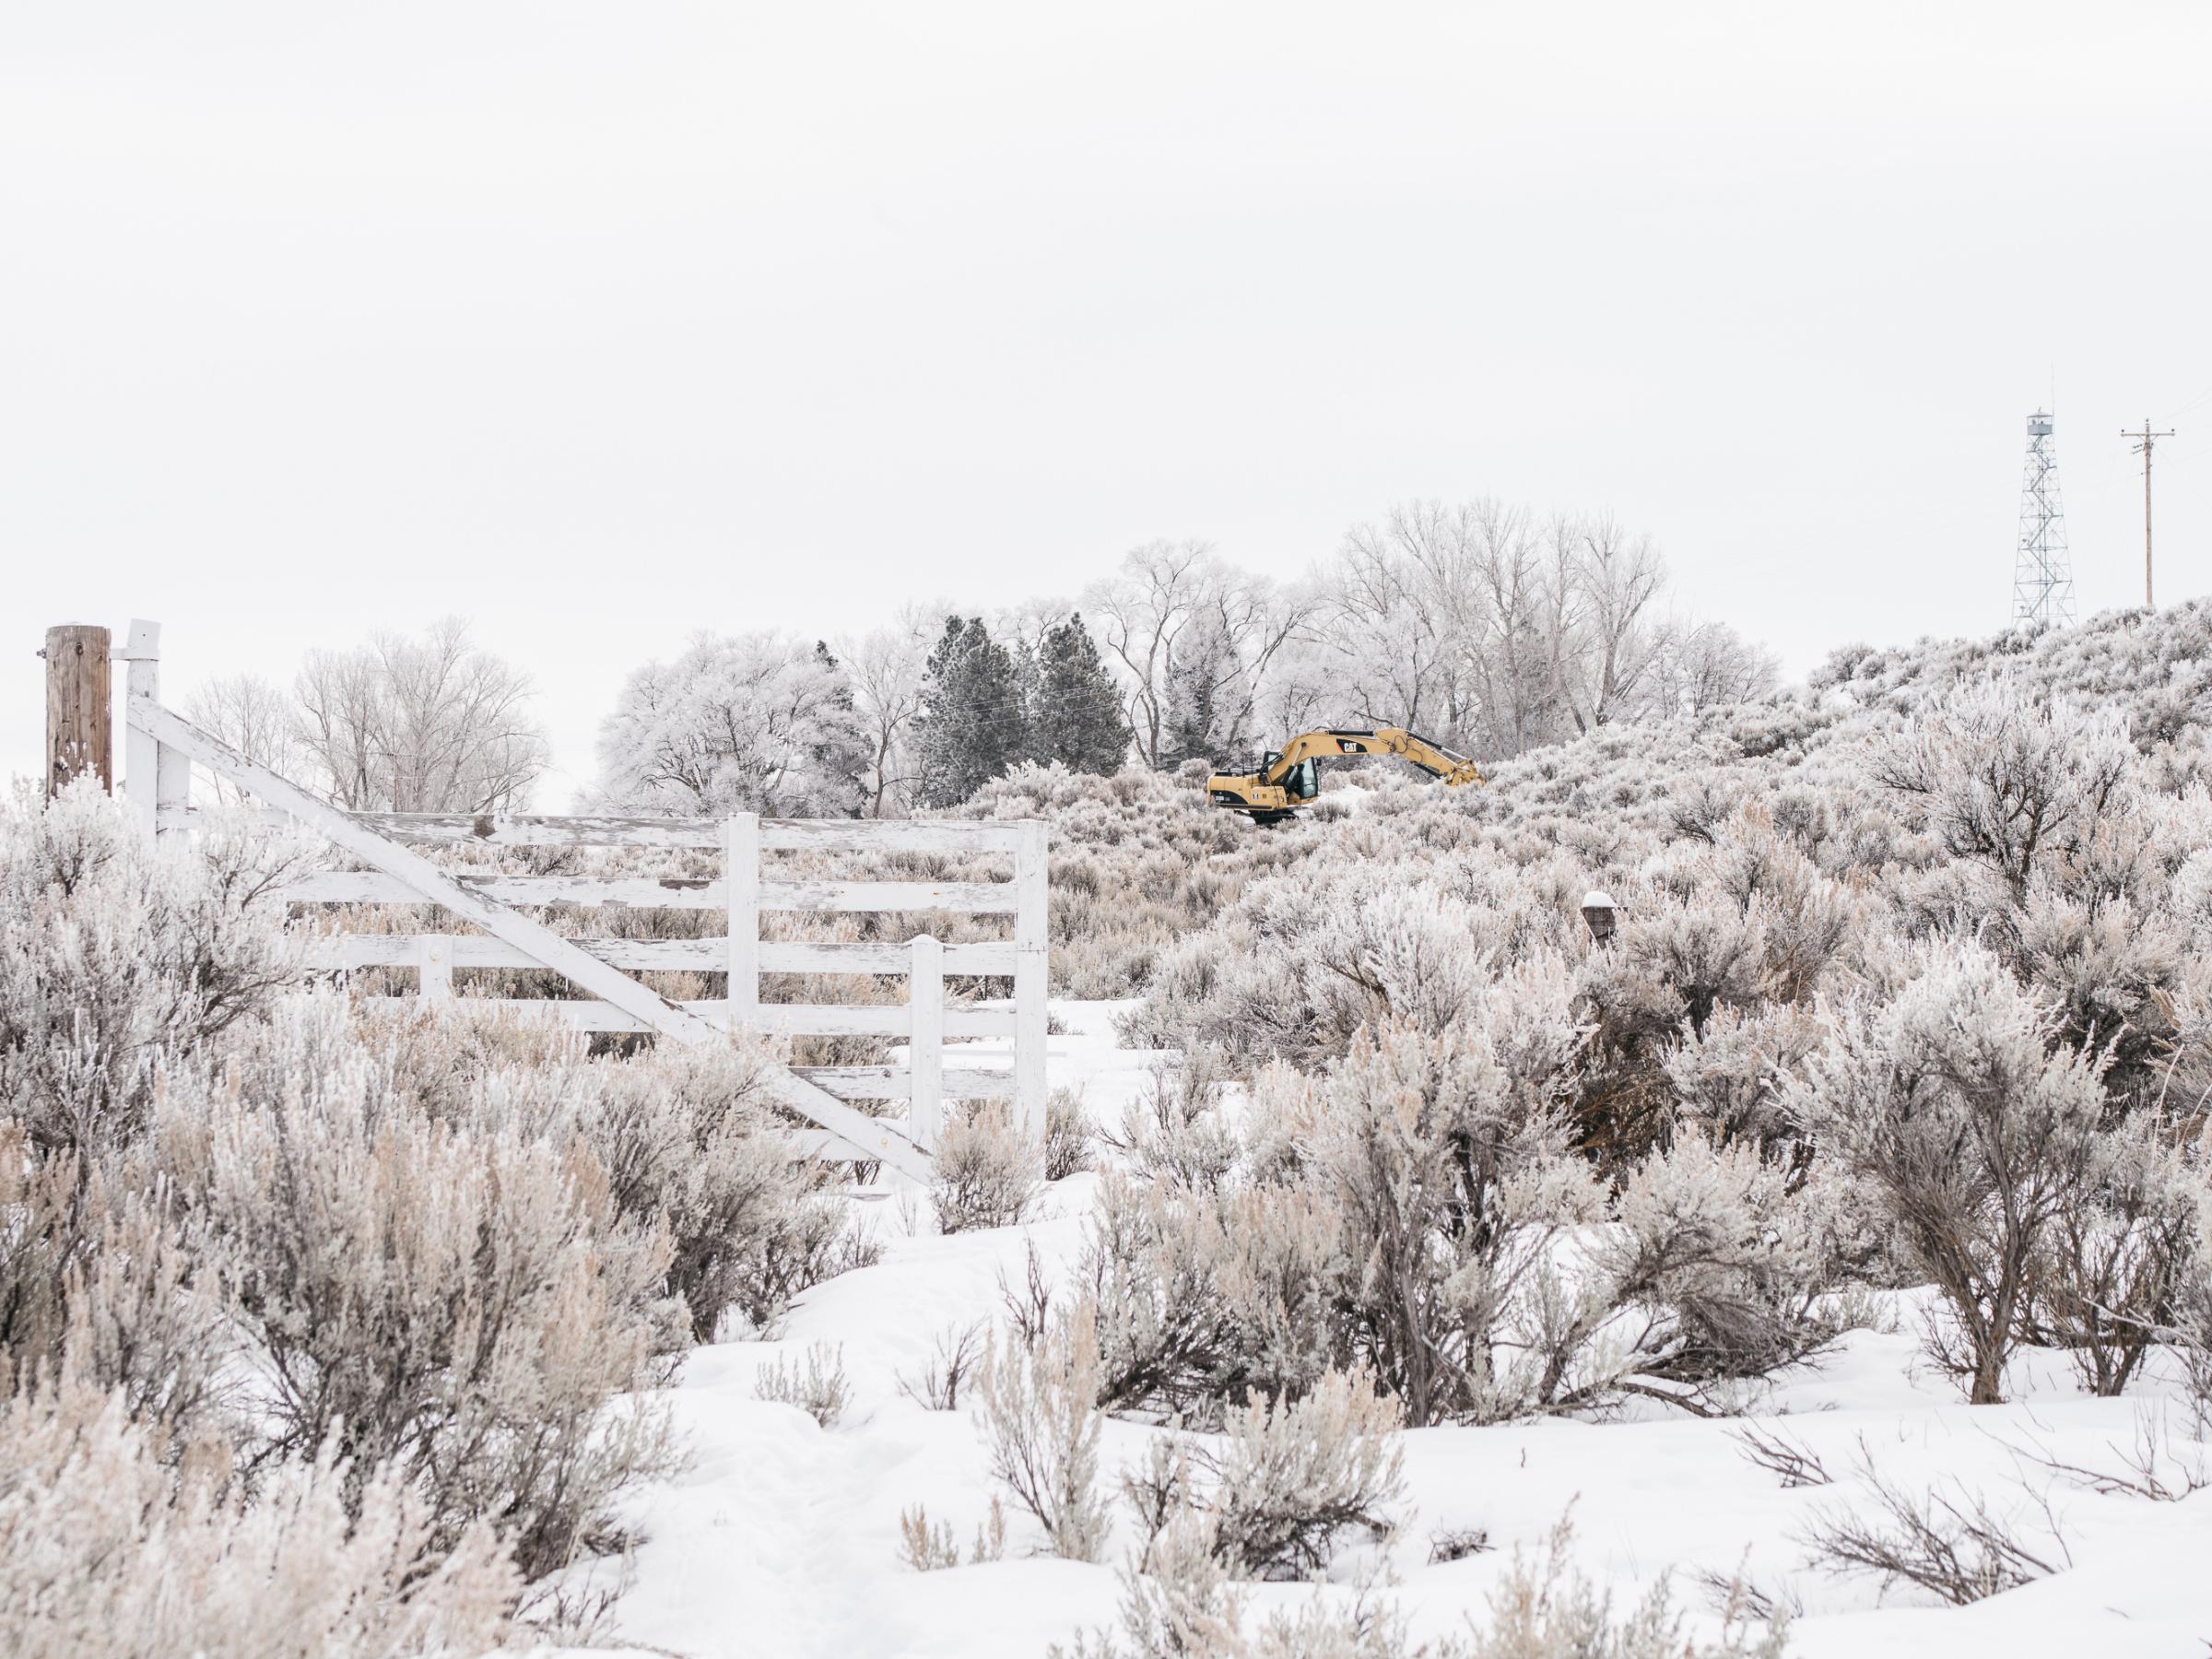 A government CAT Excavator is parked to blockade a side road entrance to the Malheur National Wildlife Refuge on Jan. 12, 2016.